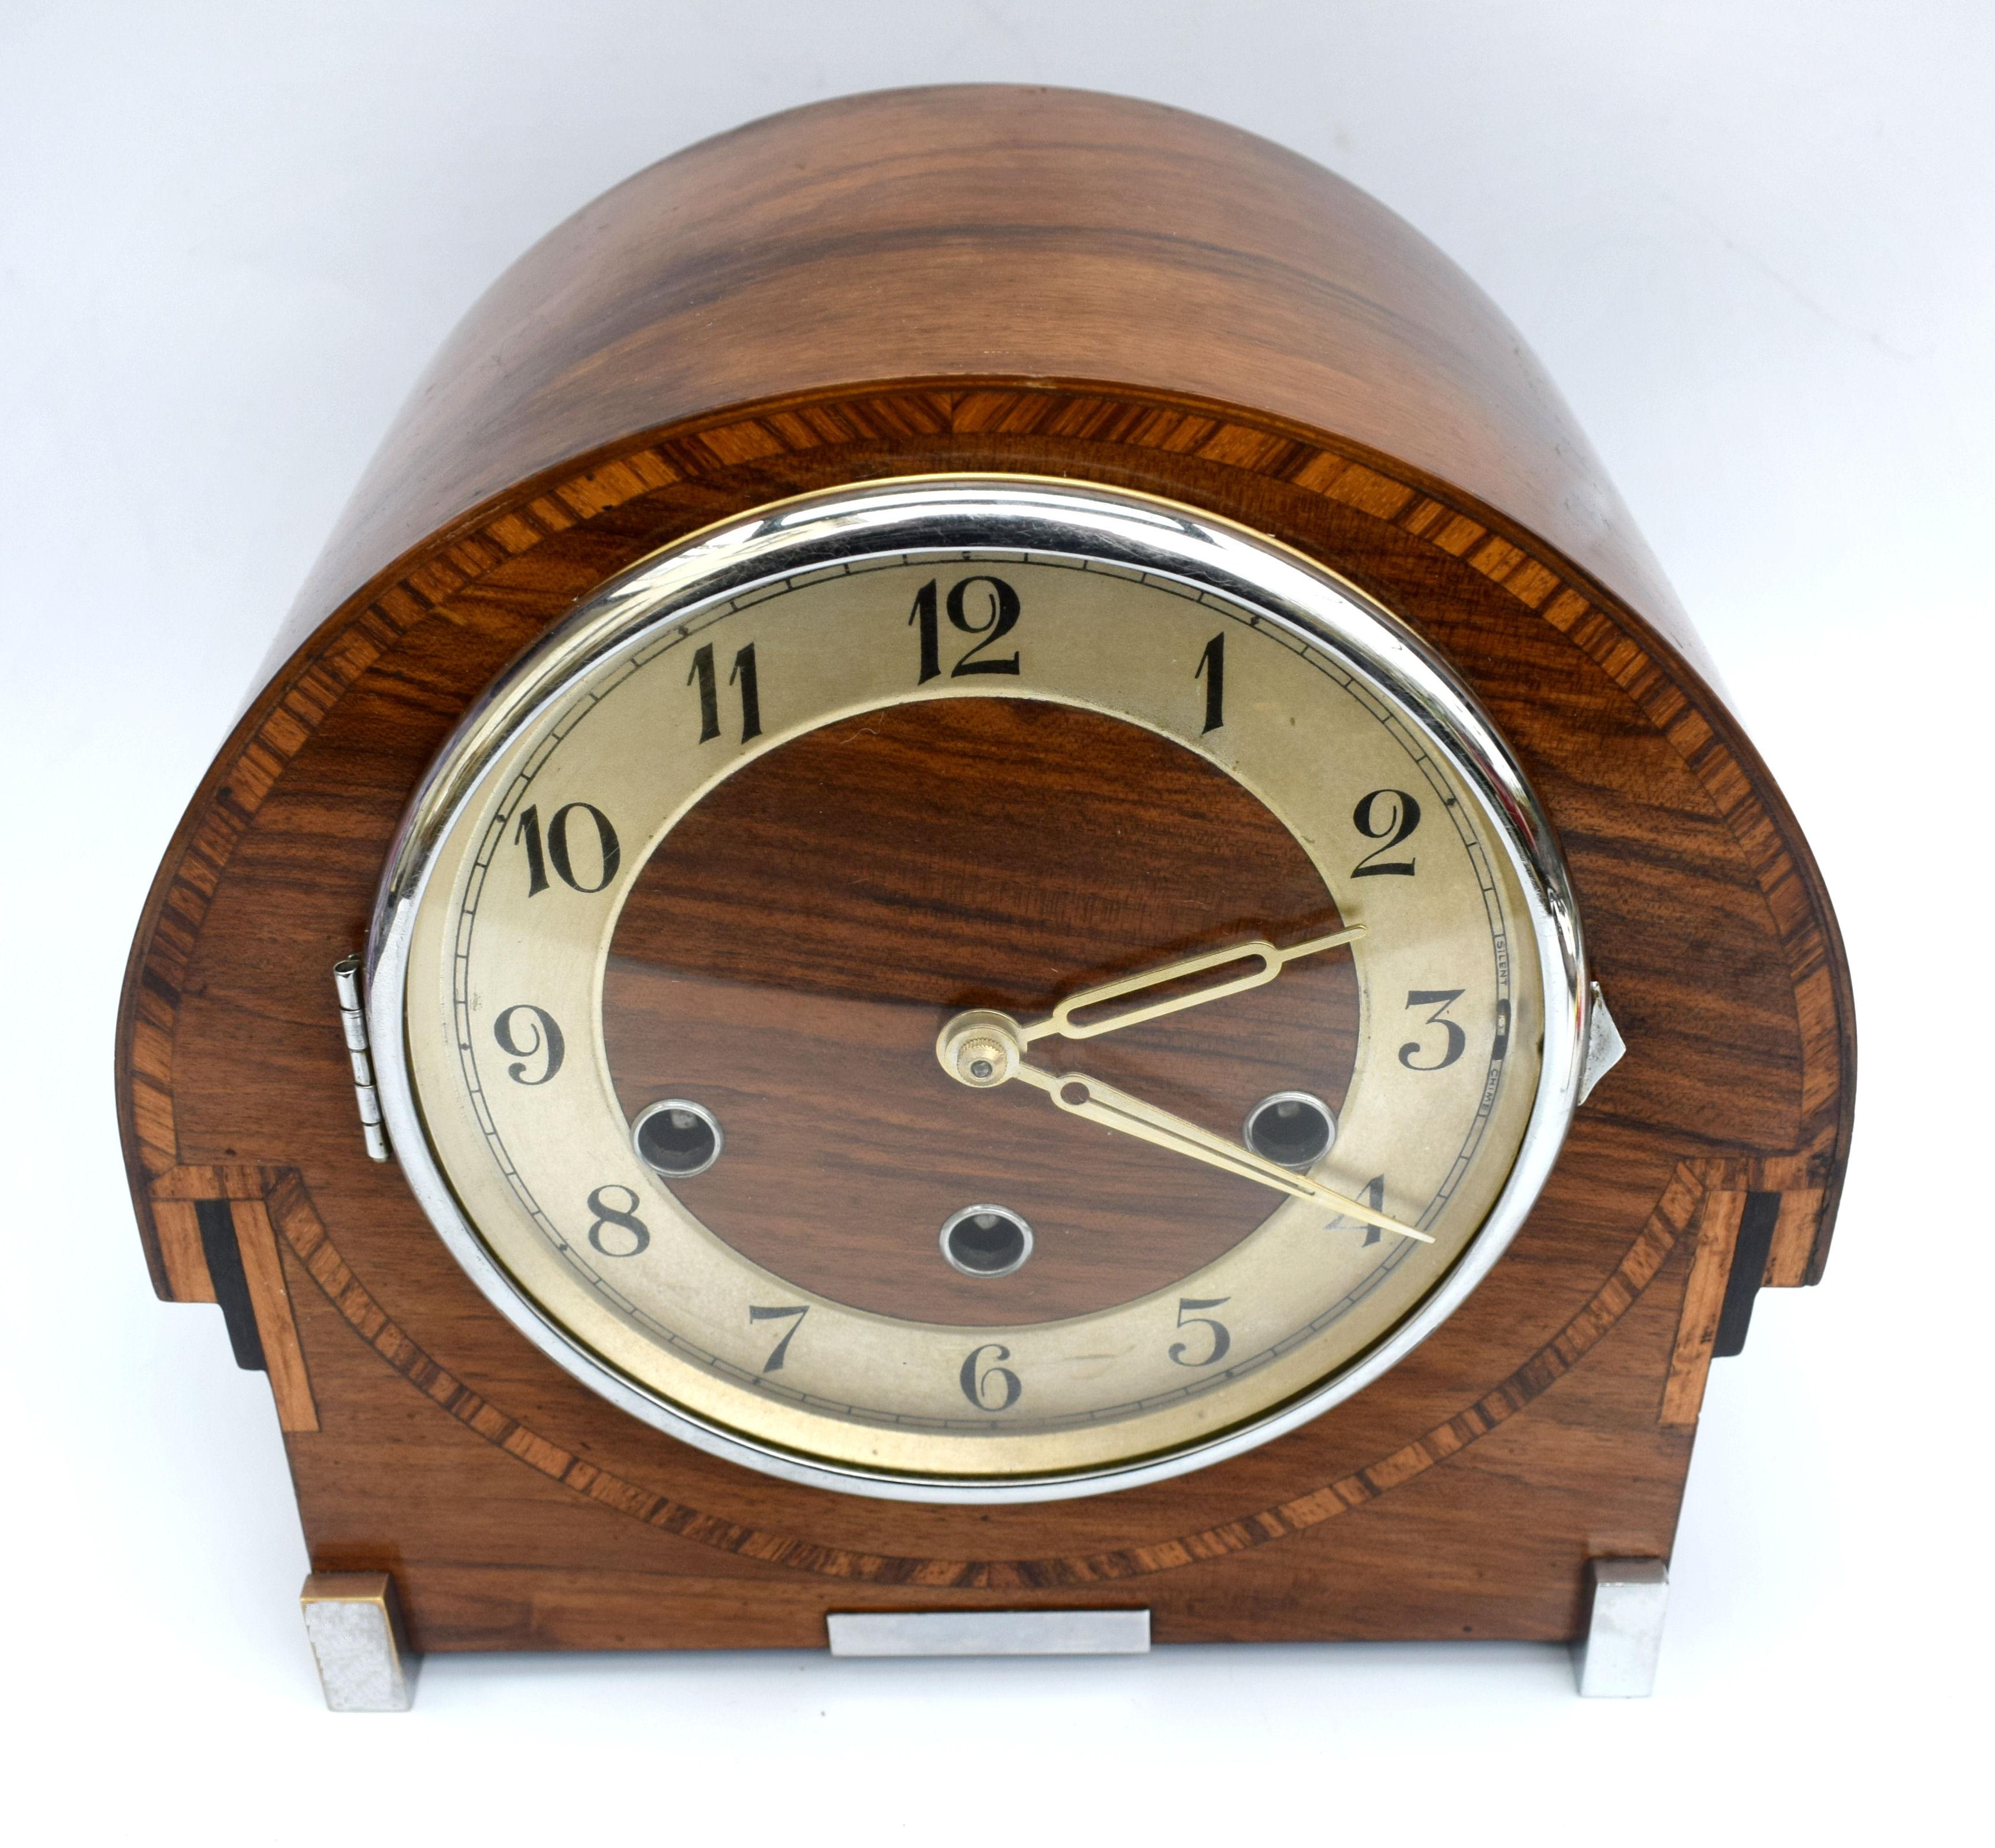 For your consideration is this very good quality and extremely attractive Art Deco mantel (fireplace) clock made in Germany and dating to the 1930s by Thomas Haller. The casing is the real hero of this timepiece, great size with heavily figured